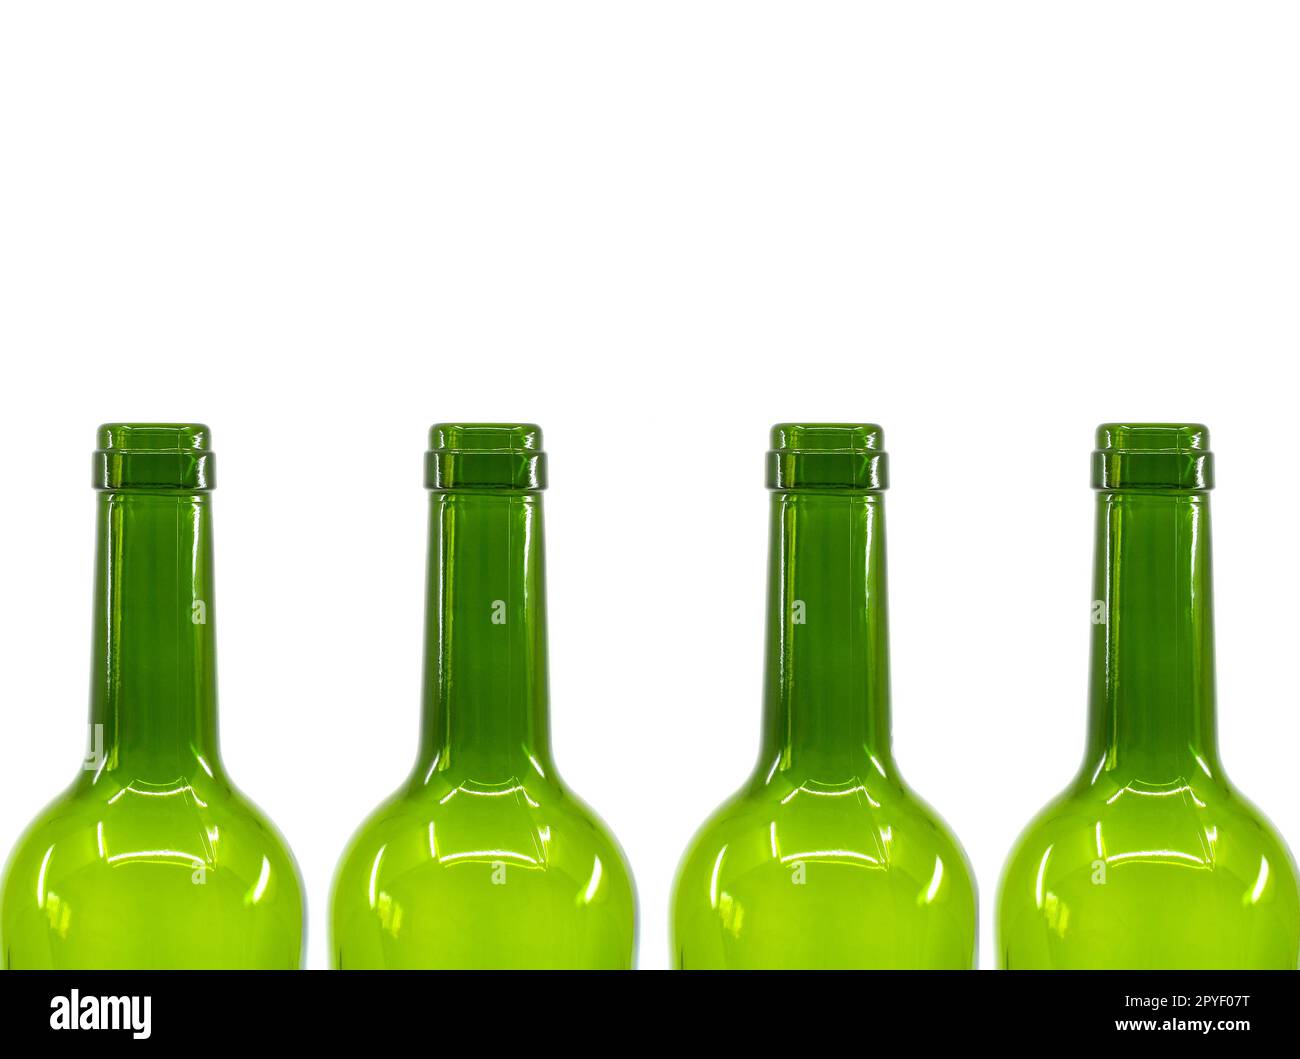 Row of empty wine bottles isolated on a plain white background. Copy psace. Alcohol consumption concept. Stock Photo